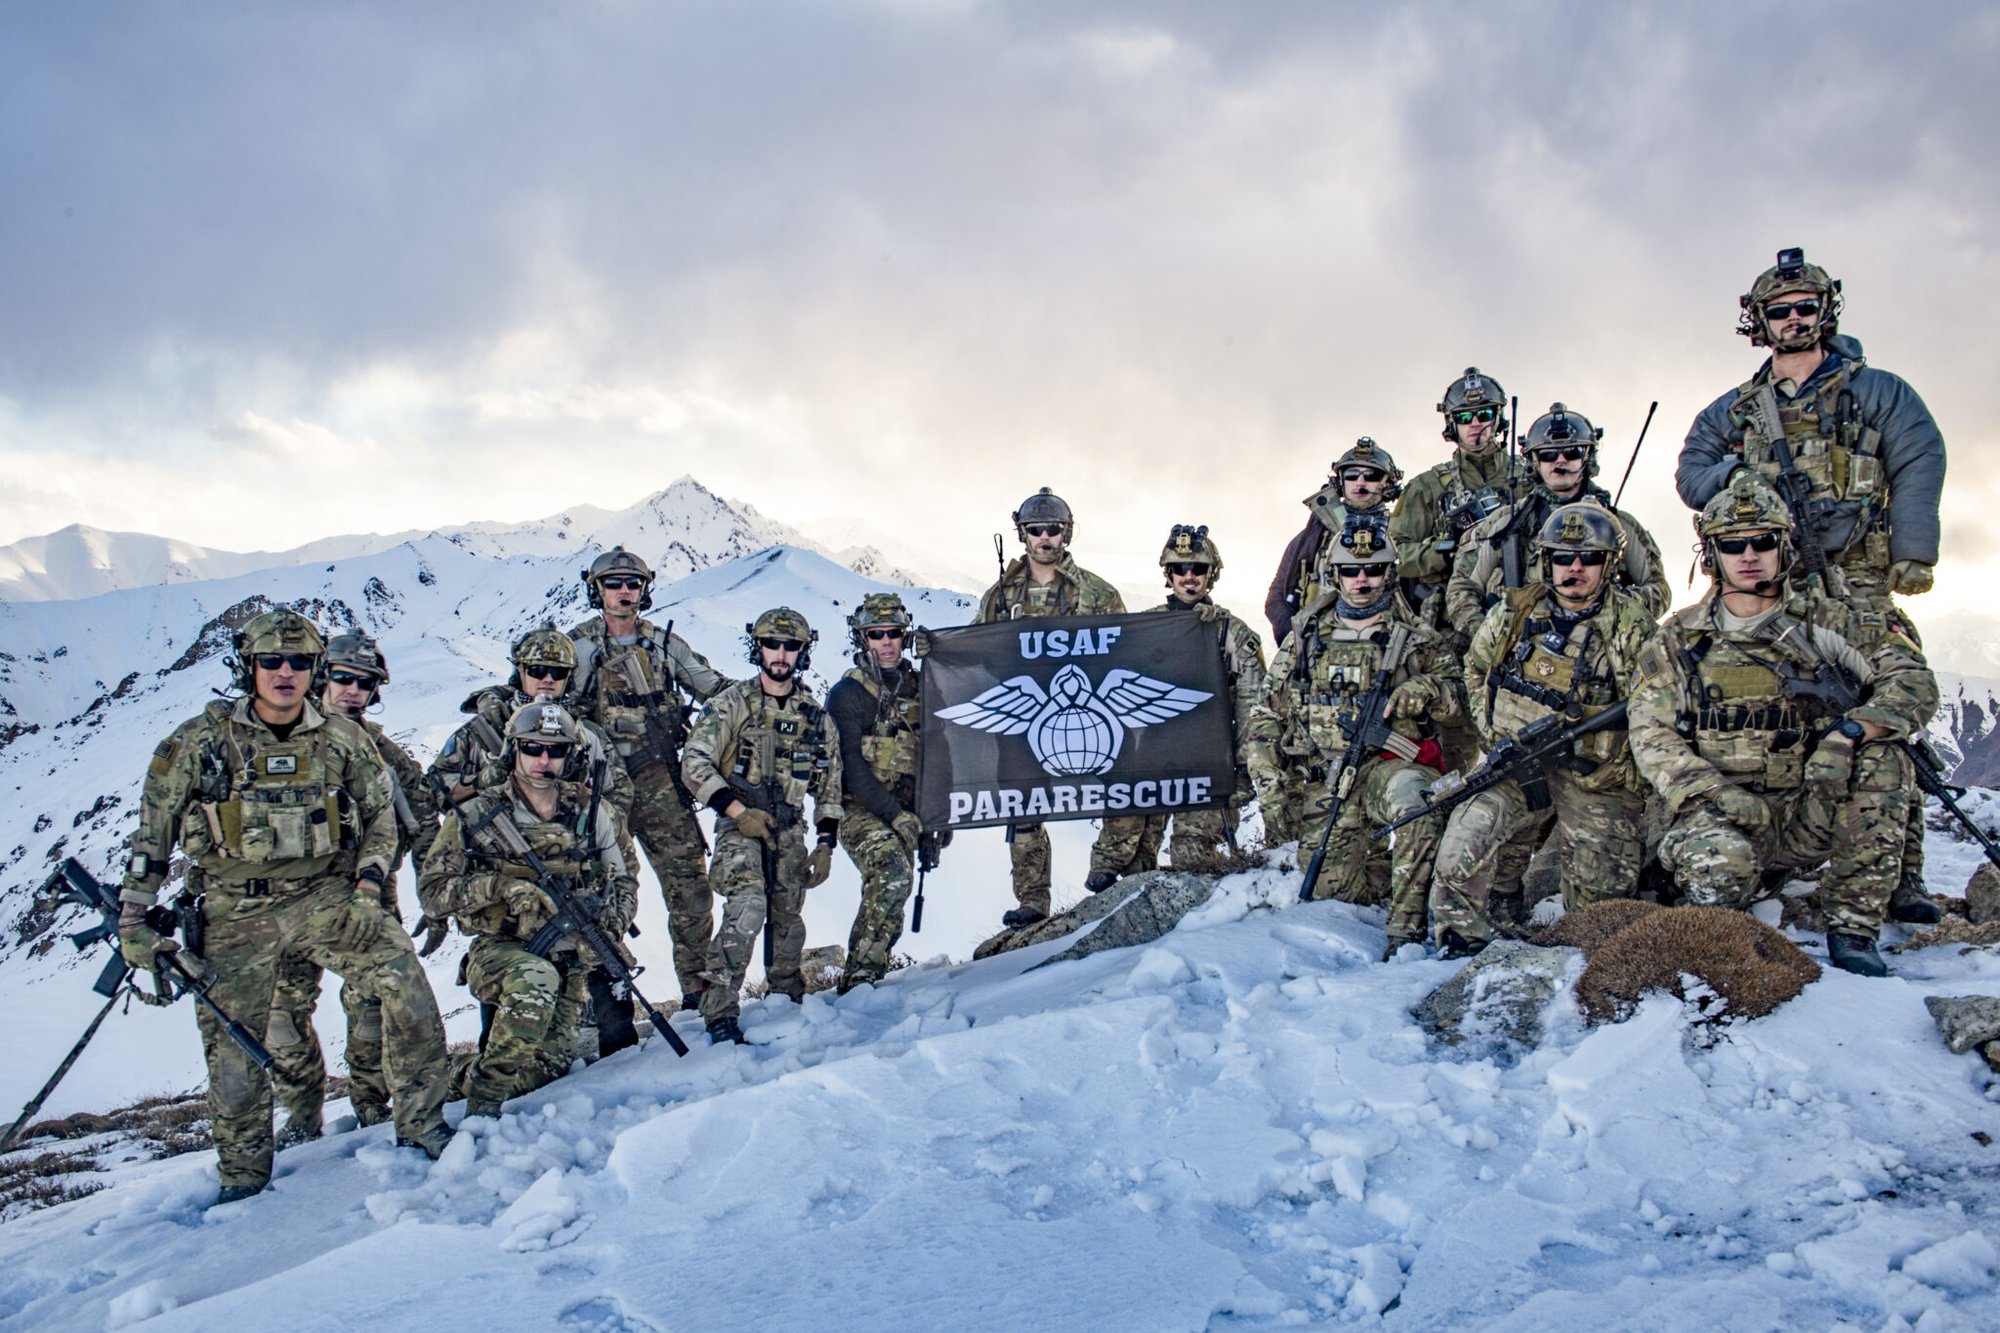 U.S. Air Force pararescuemen, assigned to the 83rd Expeditionary Rescue Squadron, Bagram Airfield, Afghanistan, pose for a team photo after the completion of a training exercise March 14, 2018. The Army crews and Air Force Guardian Angel teams conducted the exercise to build teamwork and procedures as they provide joint personnel recovery capability, aiding in the delivery of decisive airpower for U.S. Central Command. (U.S. Air Force Photo by Tech. Sgt. Gregory Brook)